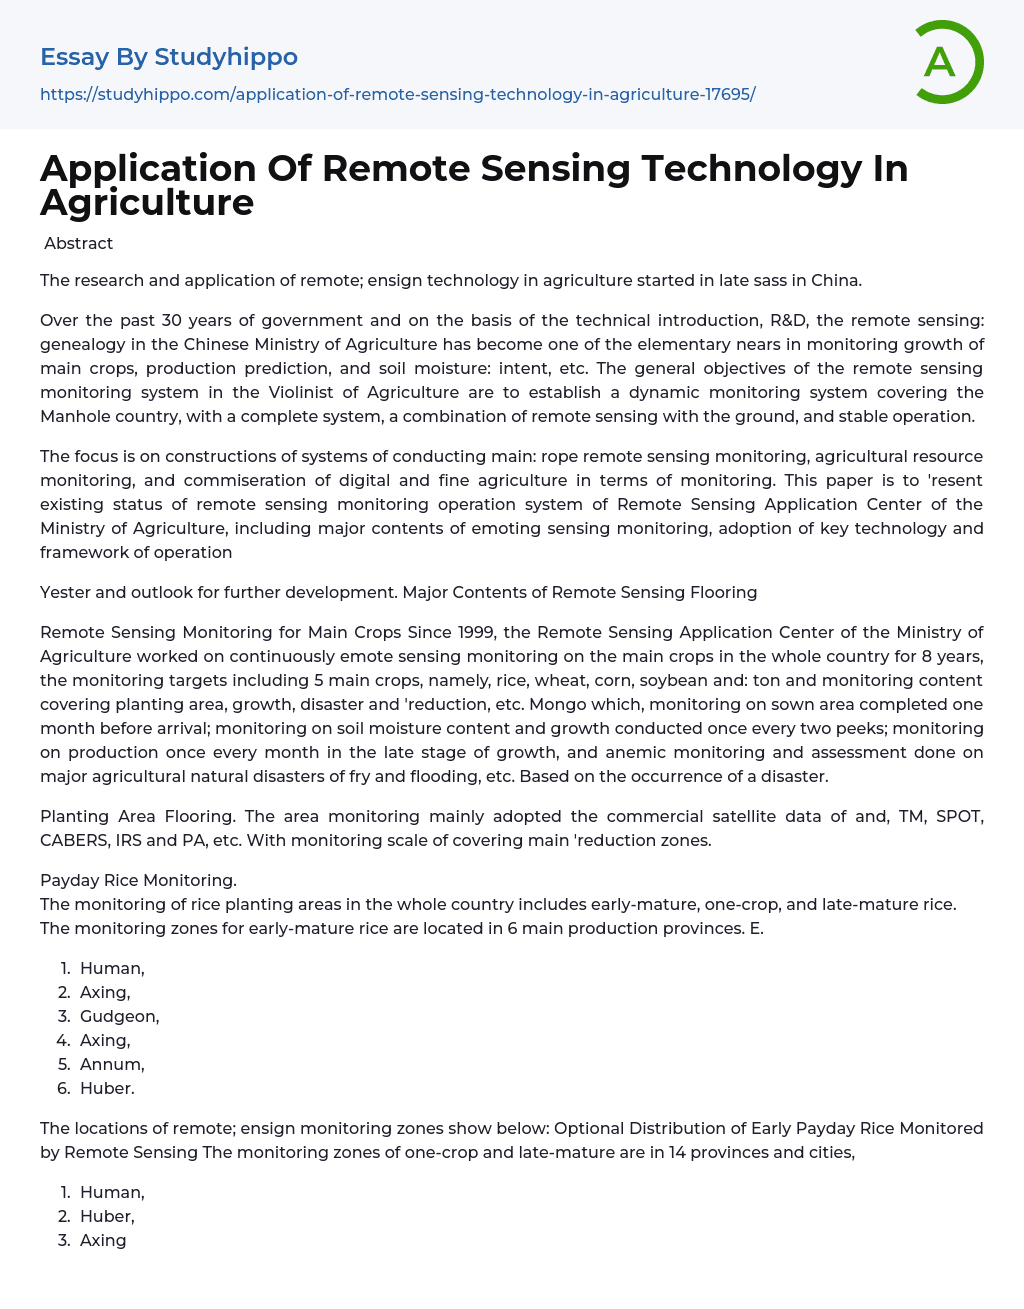 Application Of Remote Sensing Technology In Agriculture Essay Example